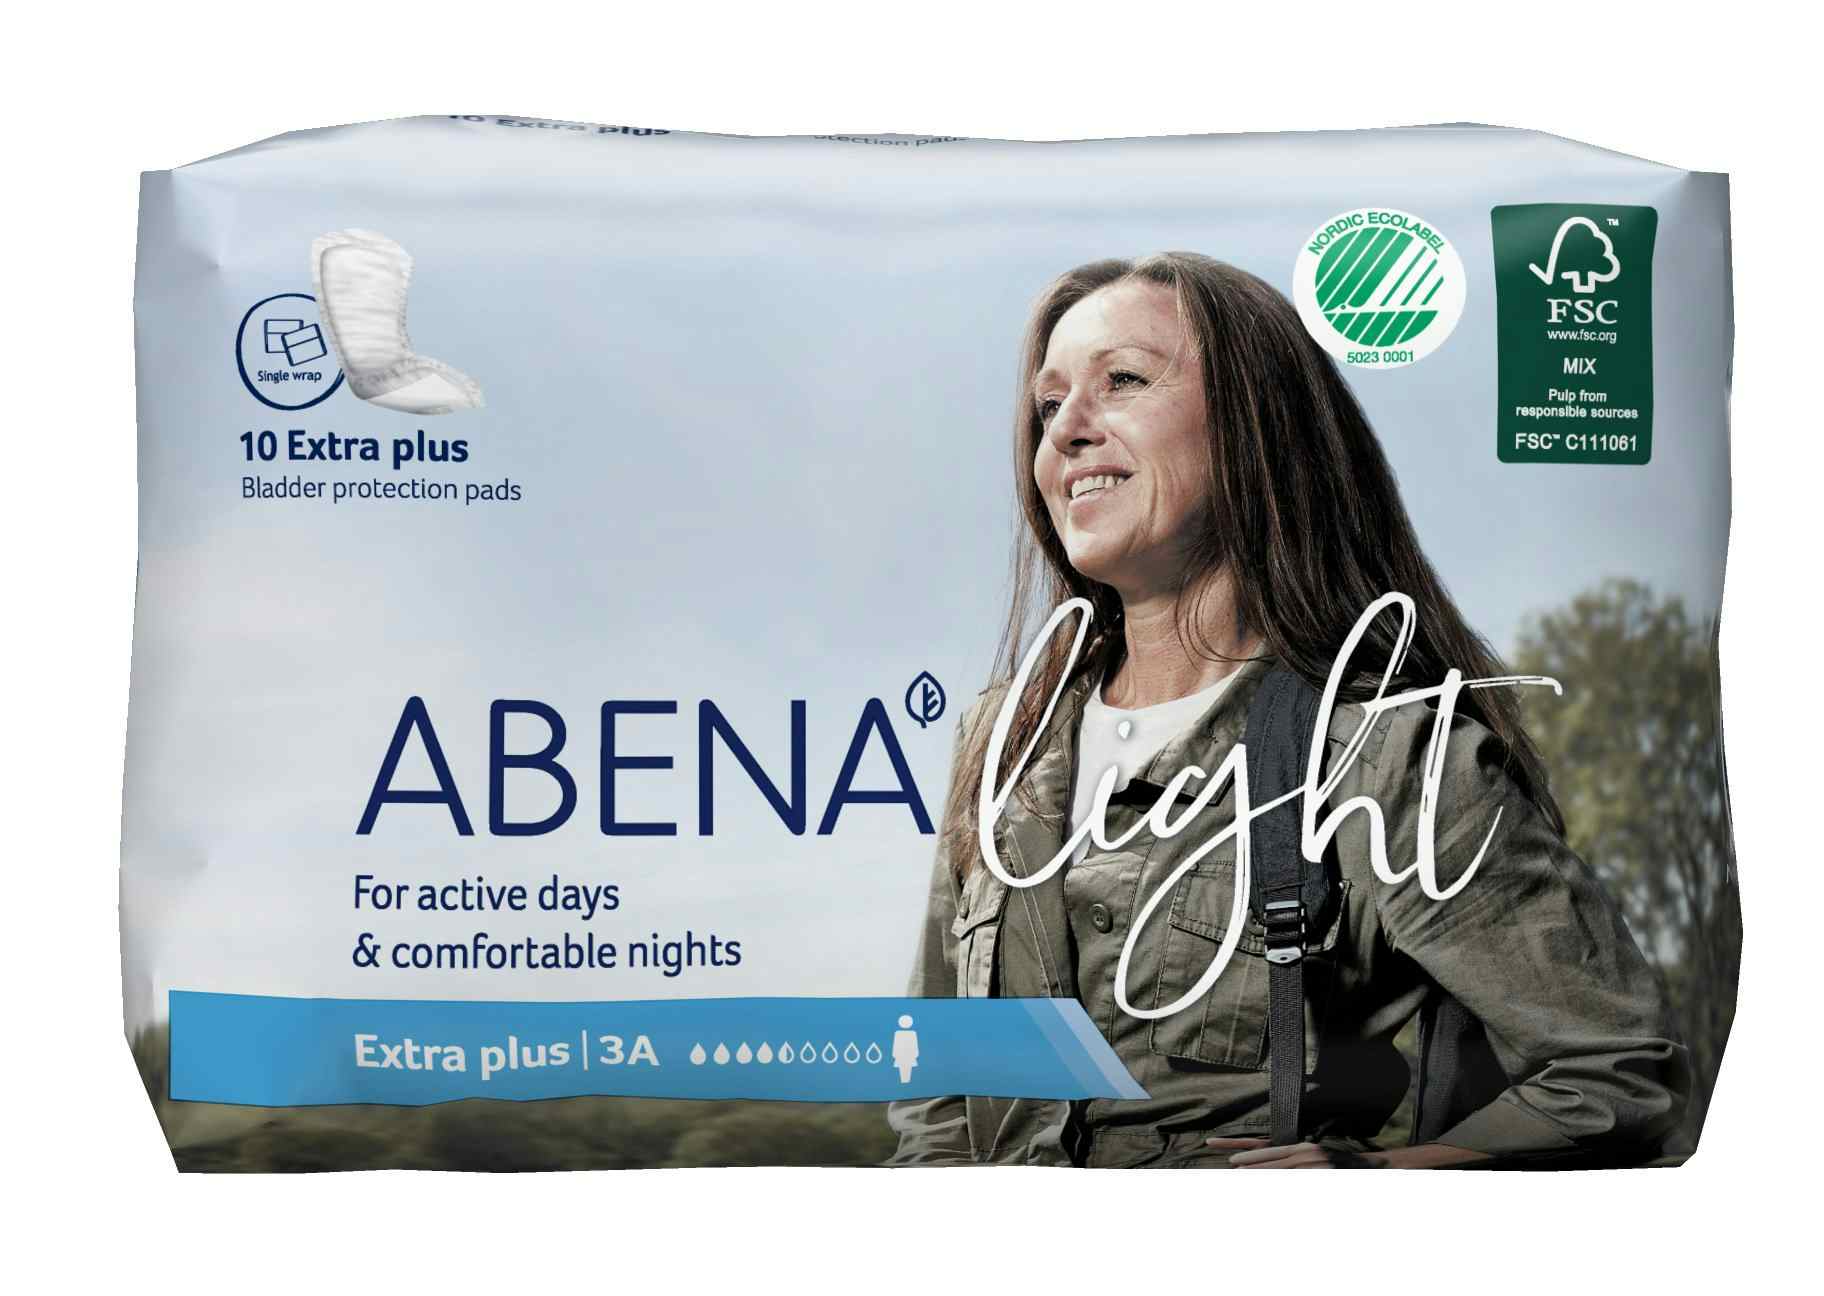 Abena Light Extra Plus Disposable Unisex Adult Bladder Control Pad, Moderate Absorbency, 1000017159, One Size Fits Most -  Bag of 10